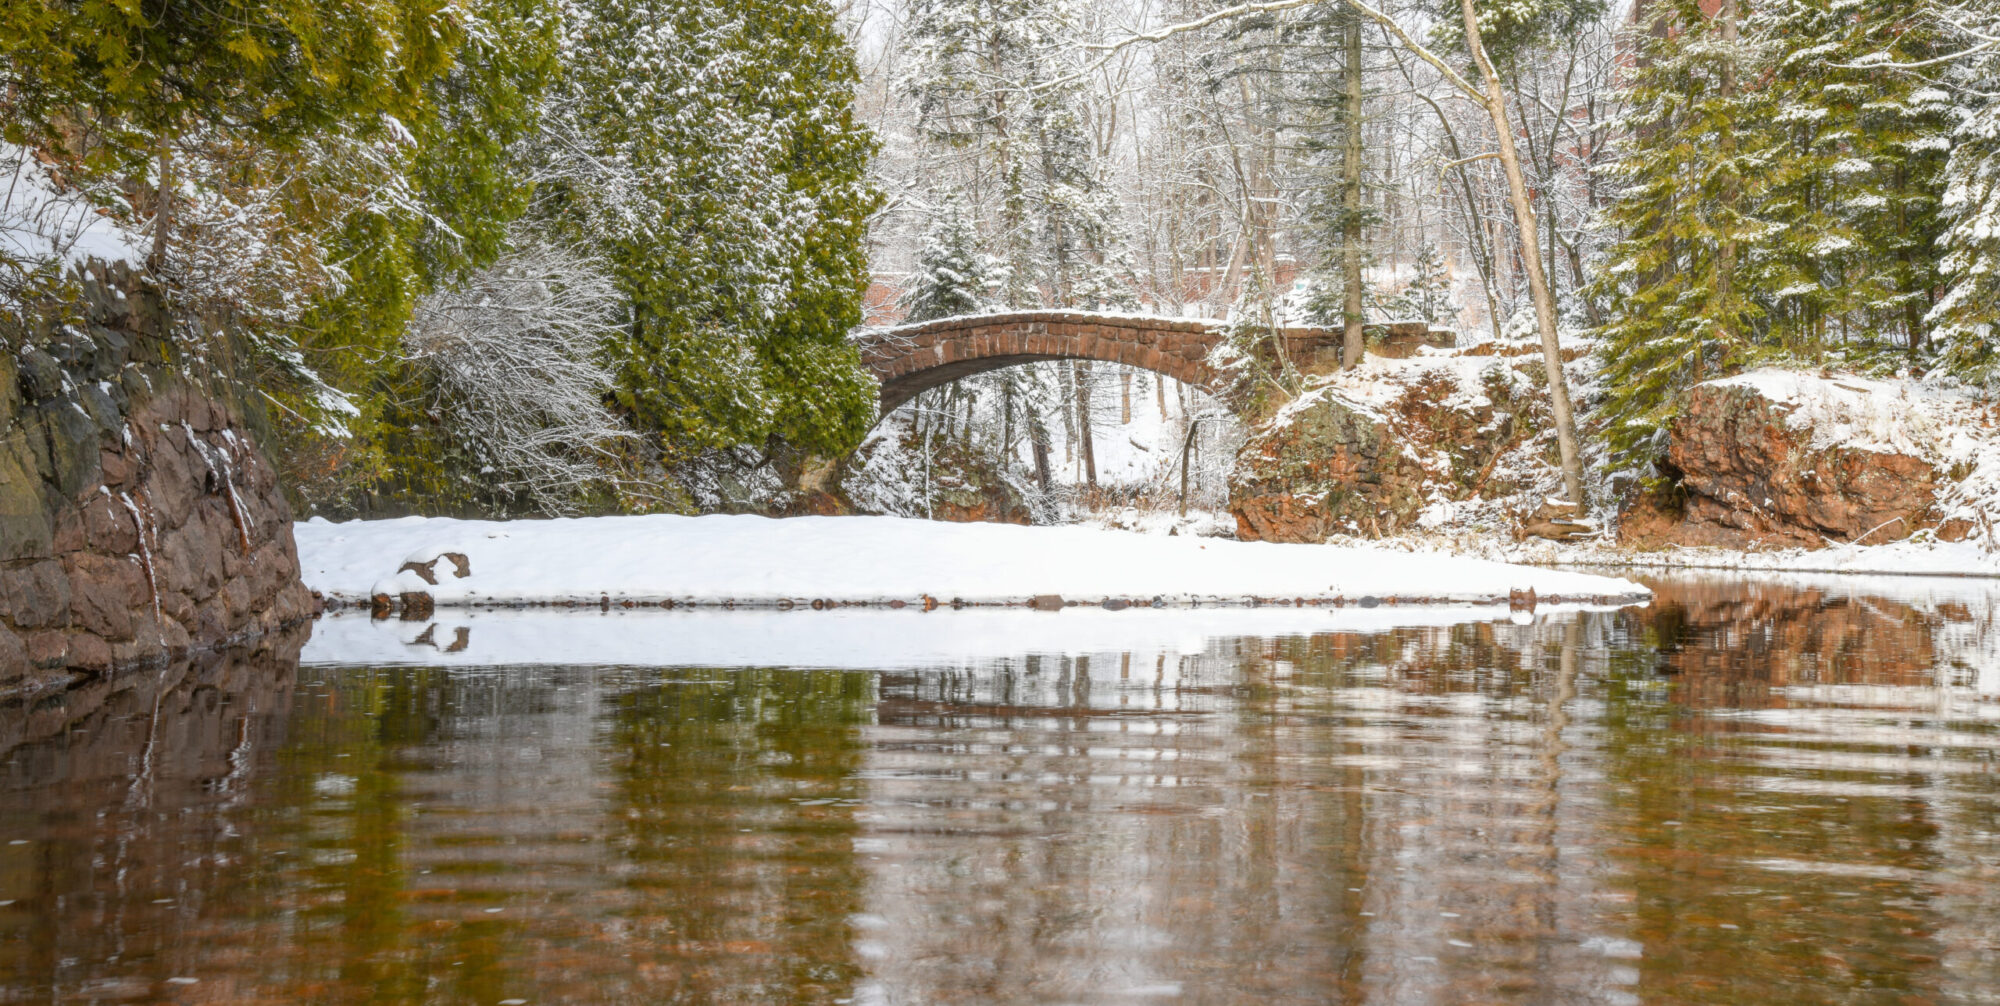 A bridge crosses over a river with snow on it and evergreen trees covered in snow on either side.